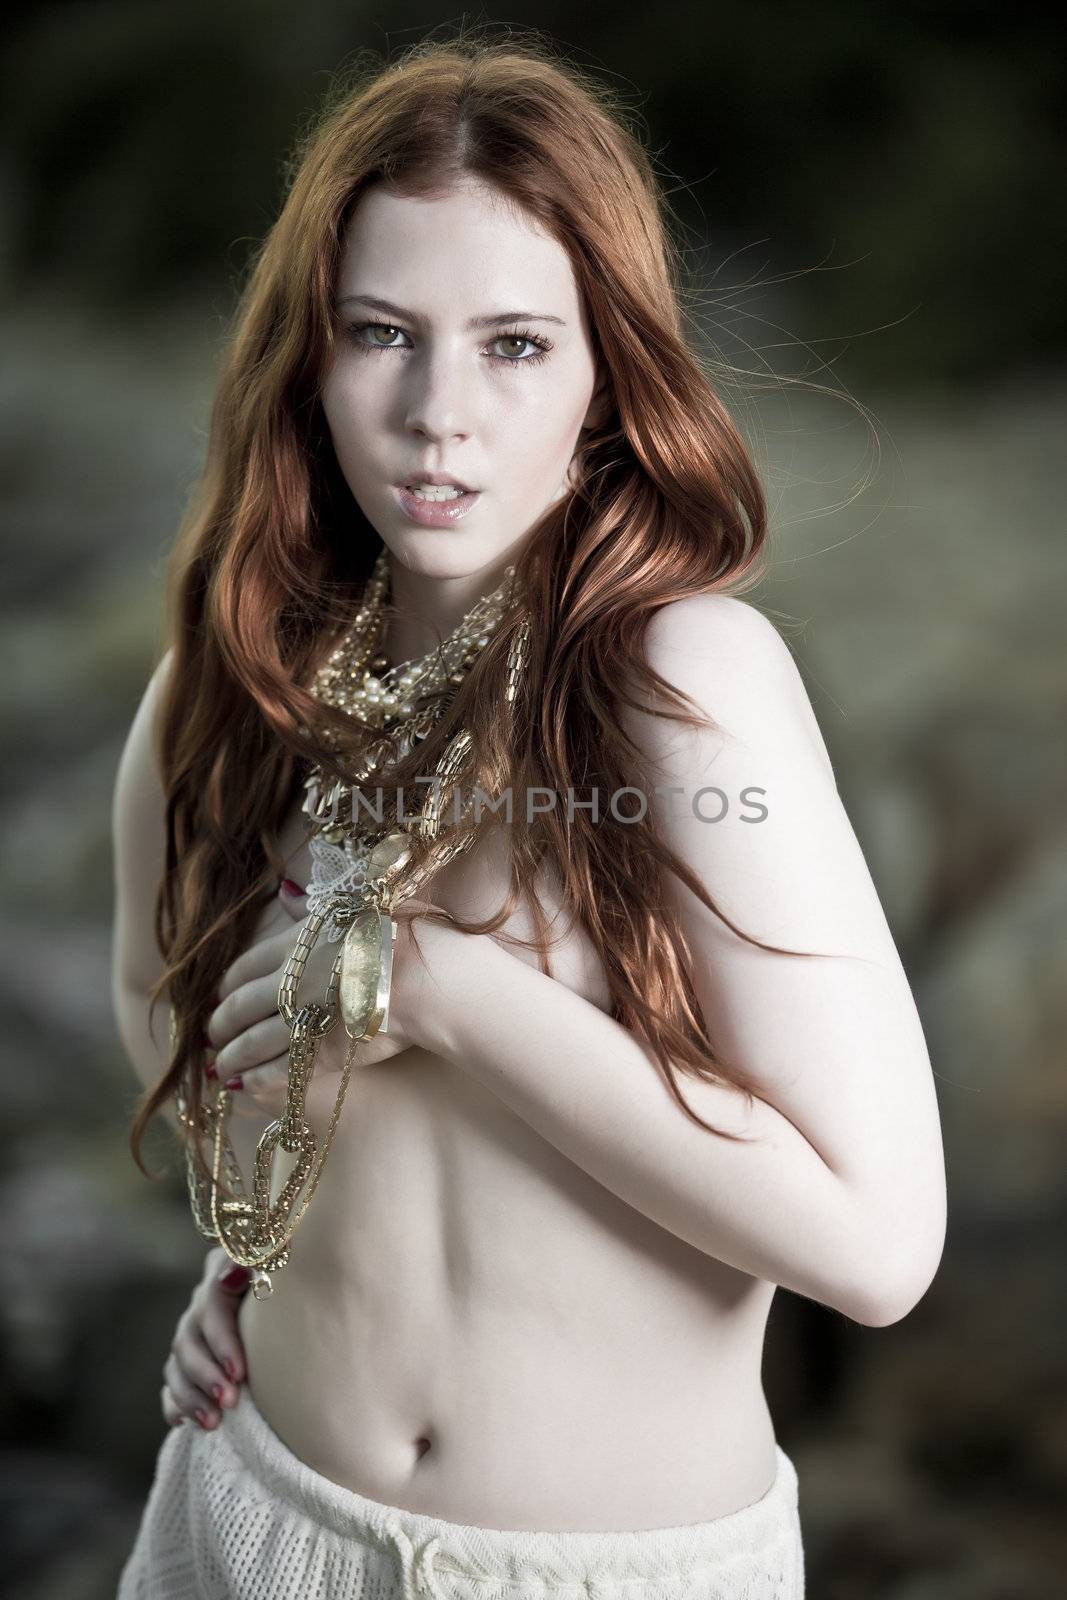 A semi-nude woman with beautiful white skin and long red hair outdoors on a beach